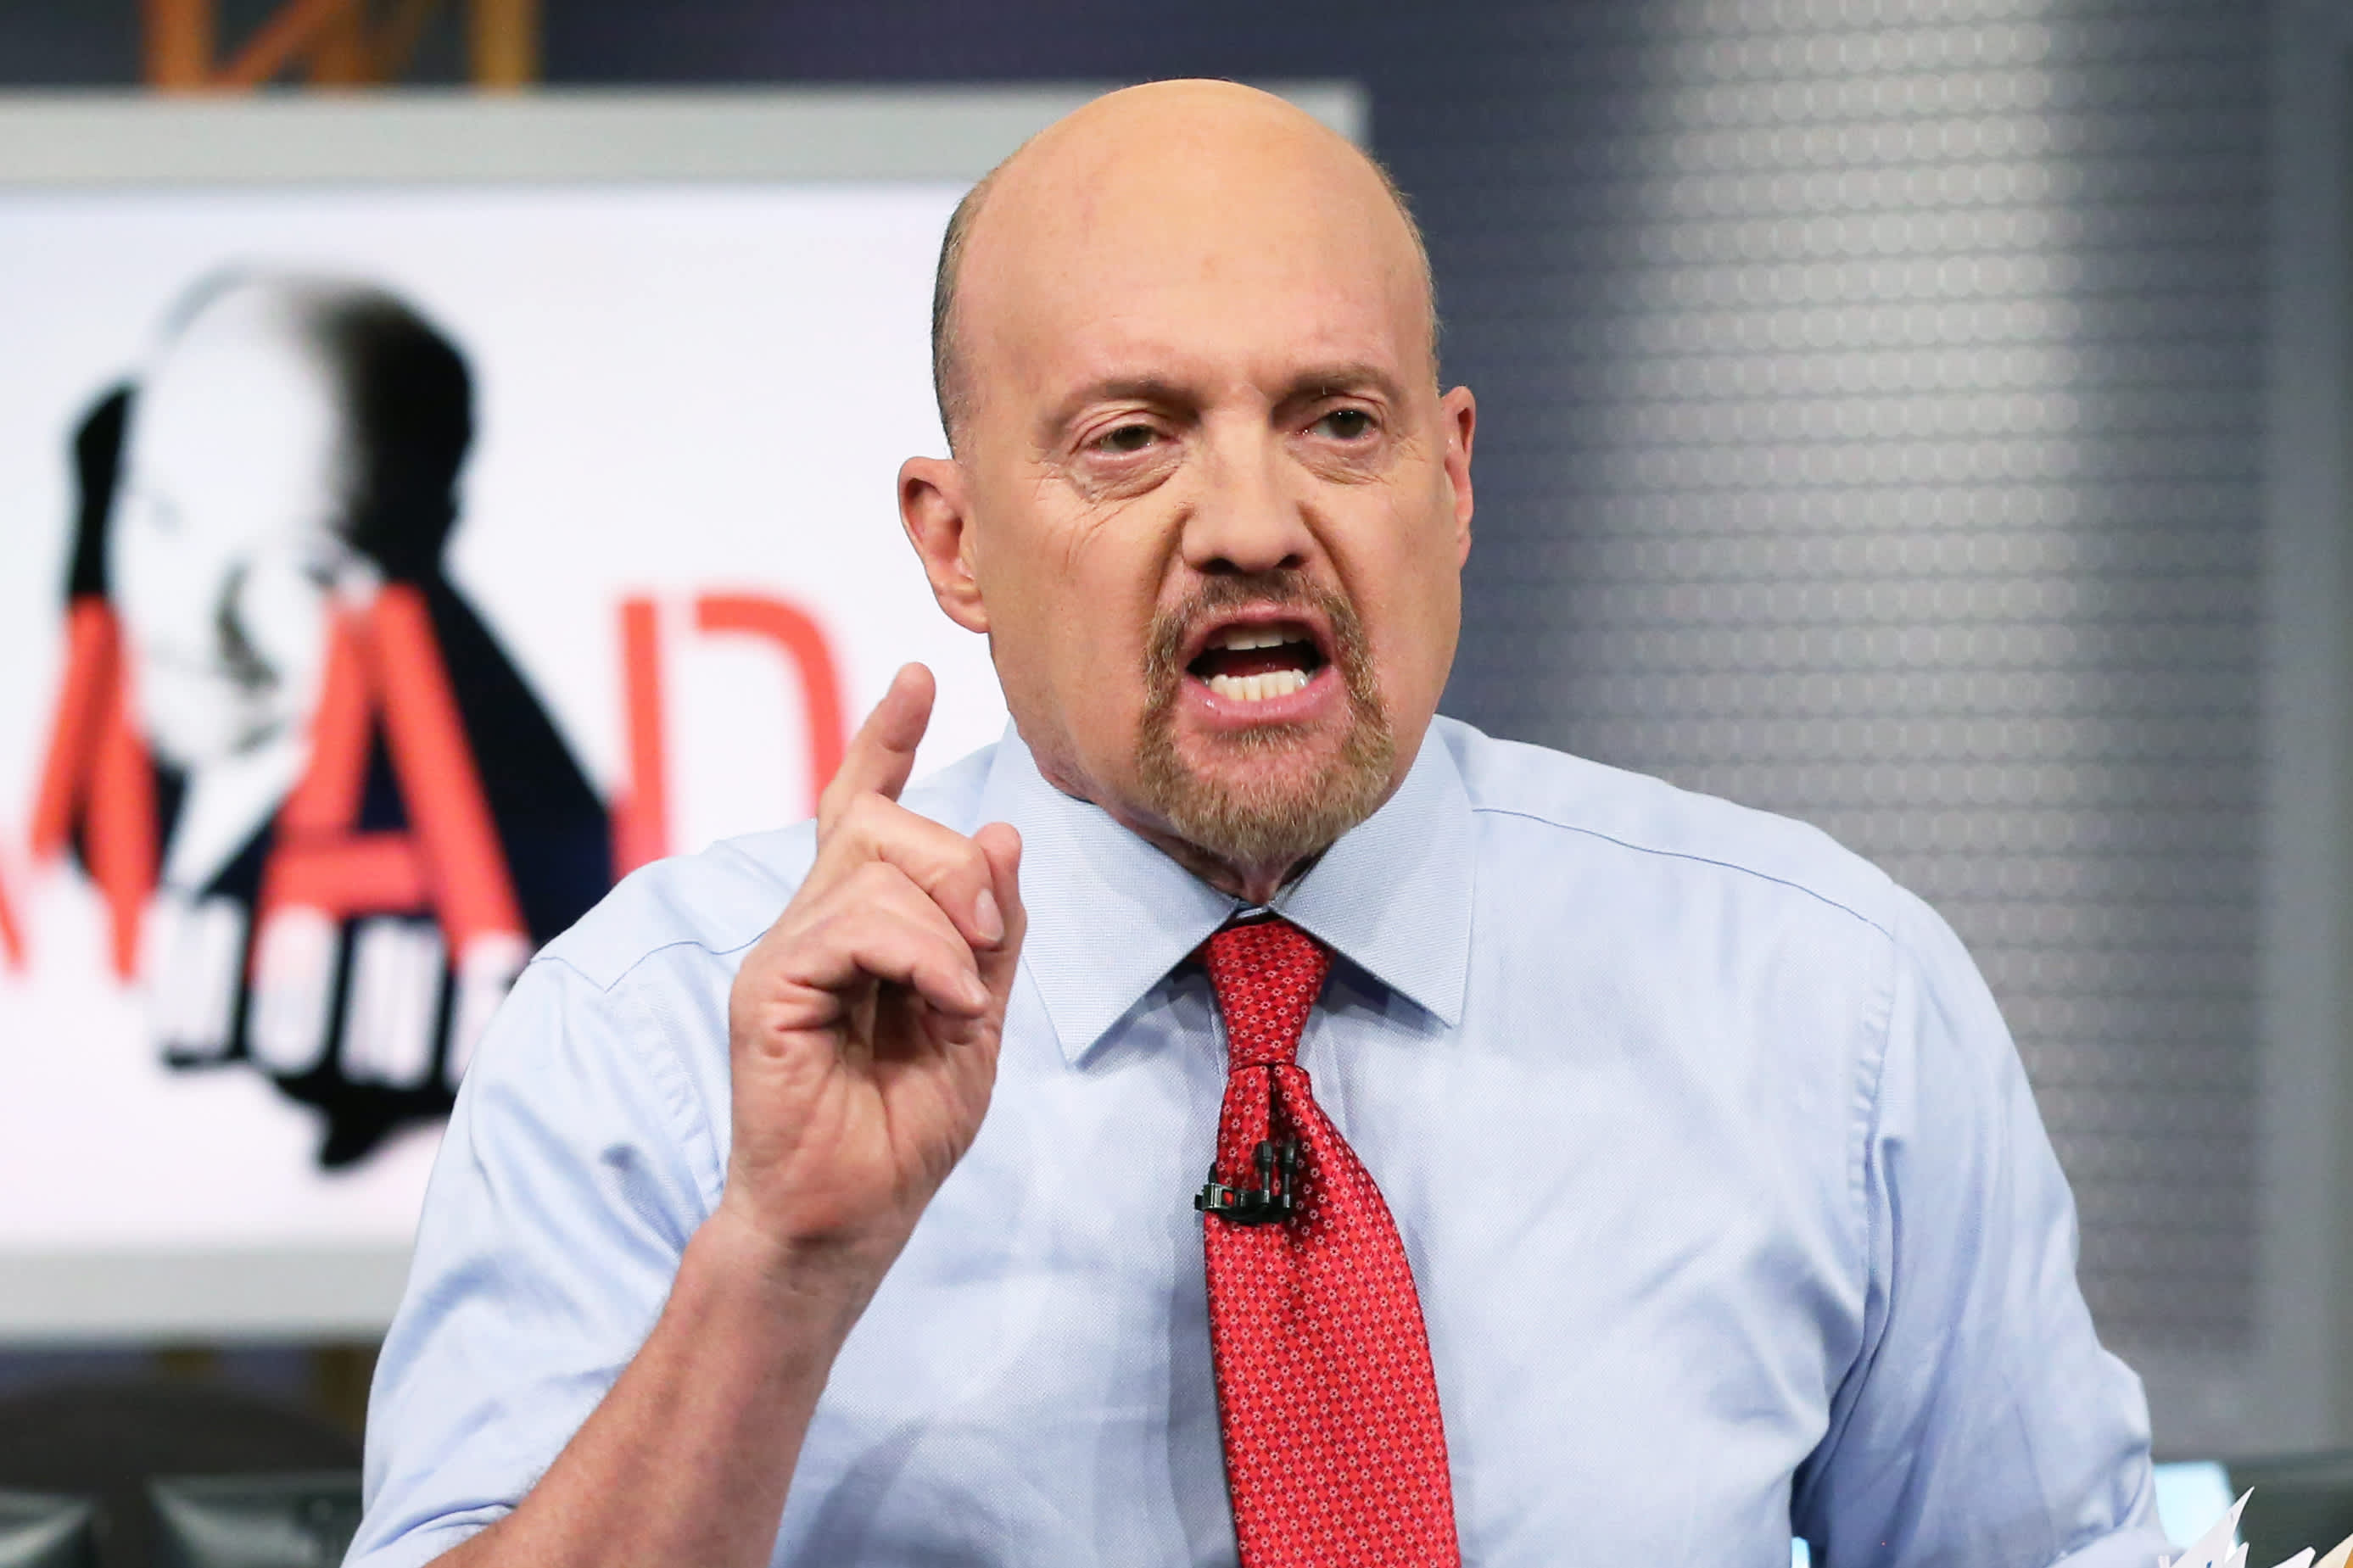 Jim Cramer Calls Out XRP, Dogecoin and Solana as “Cons”